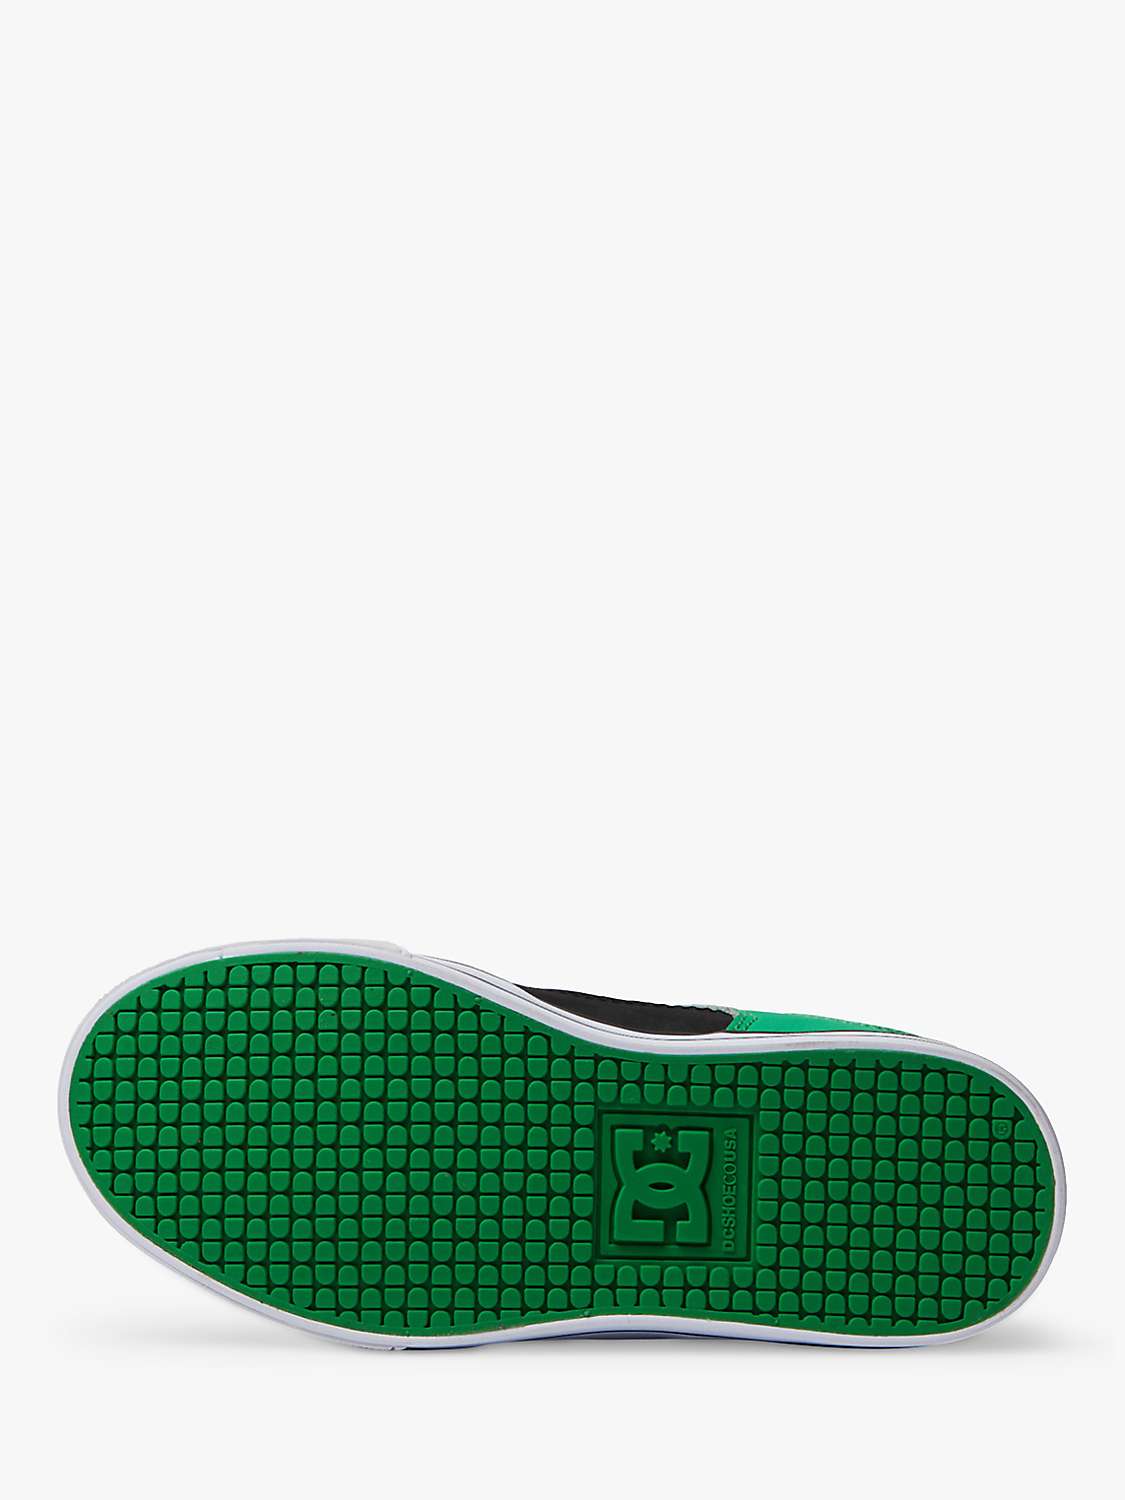 Buy DC Shoes Kids' Pure Leather Lace Up Trainers, Black/Green Online at johnlewis.com